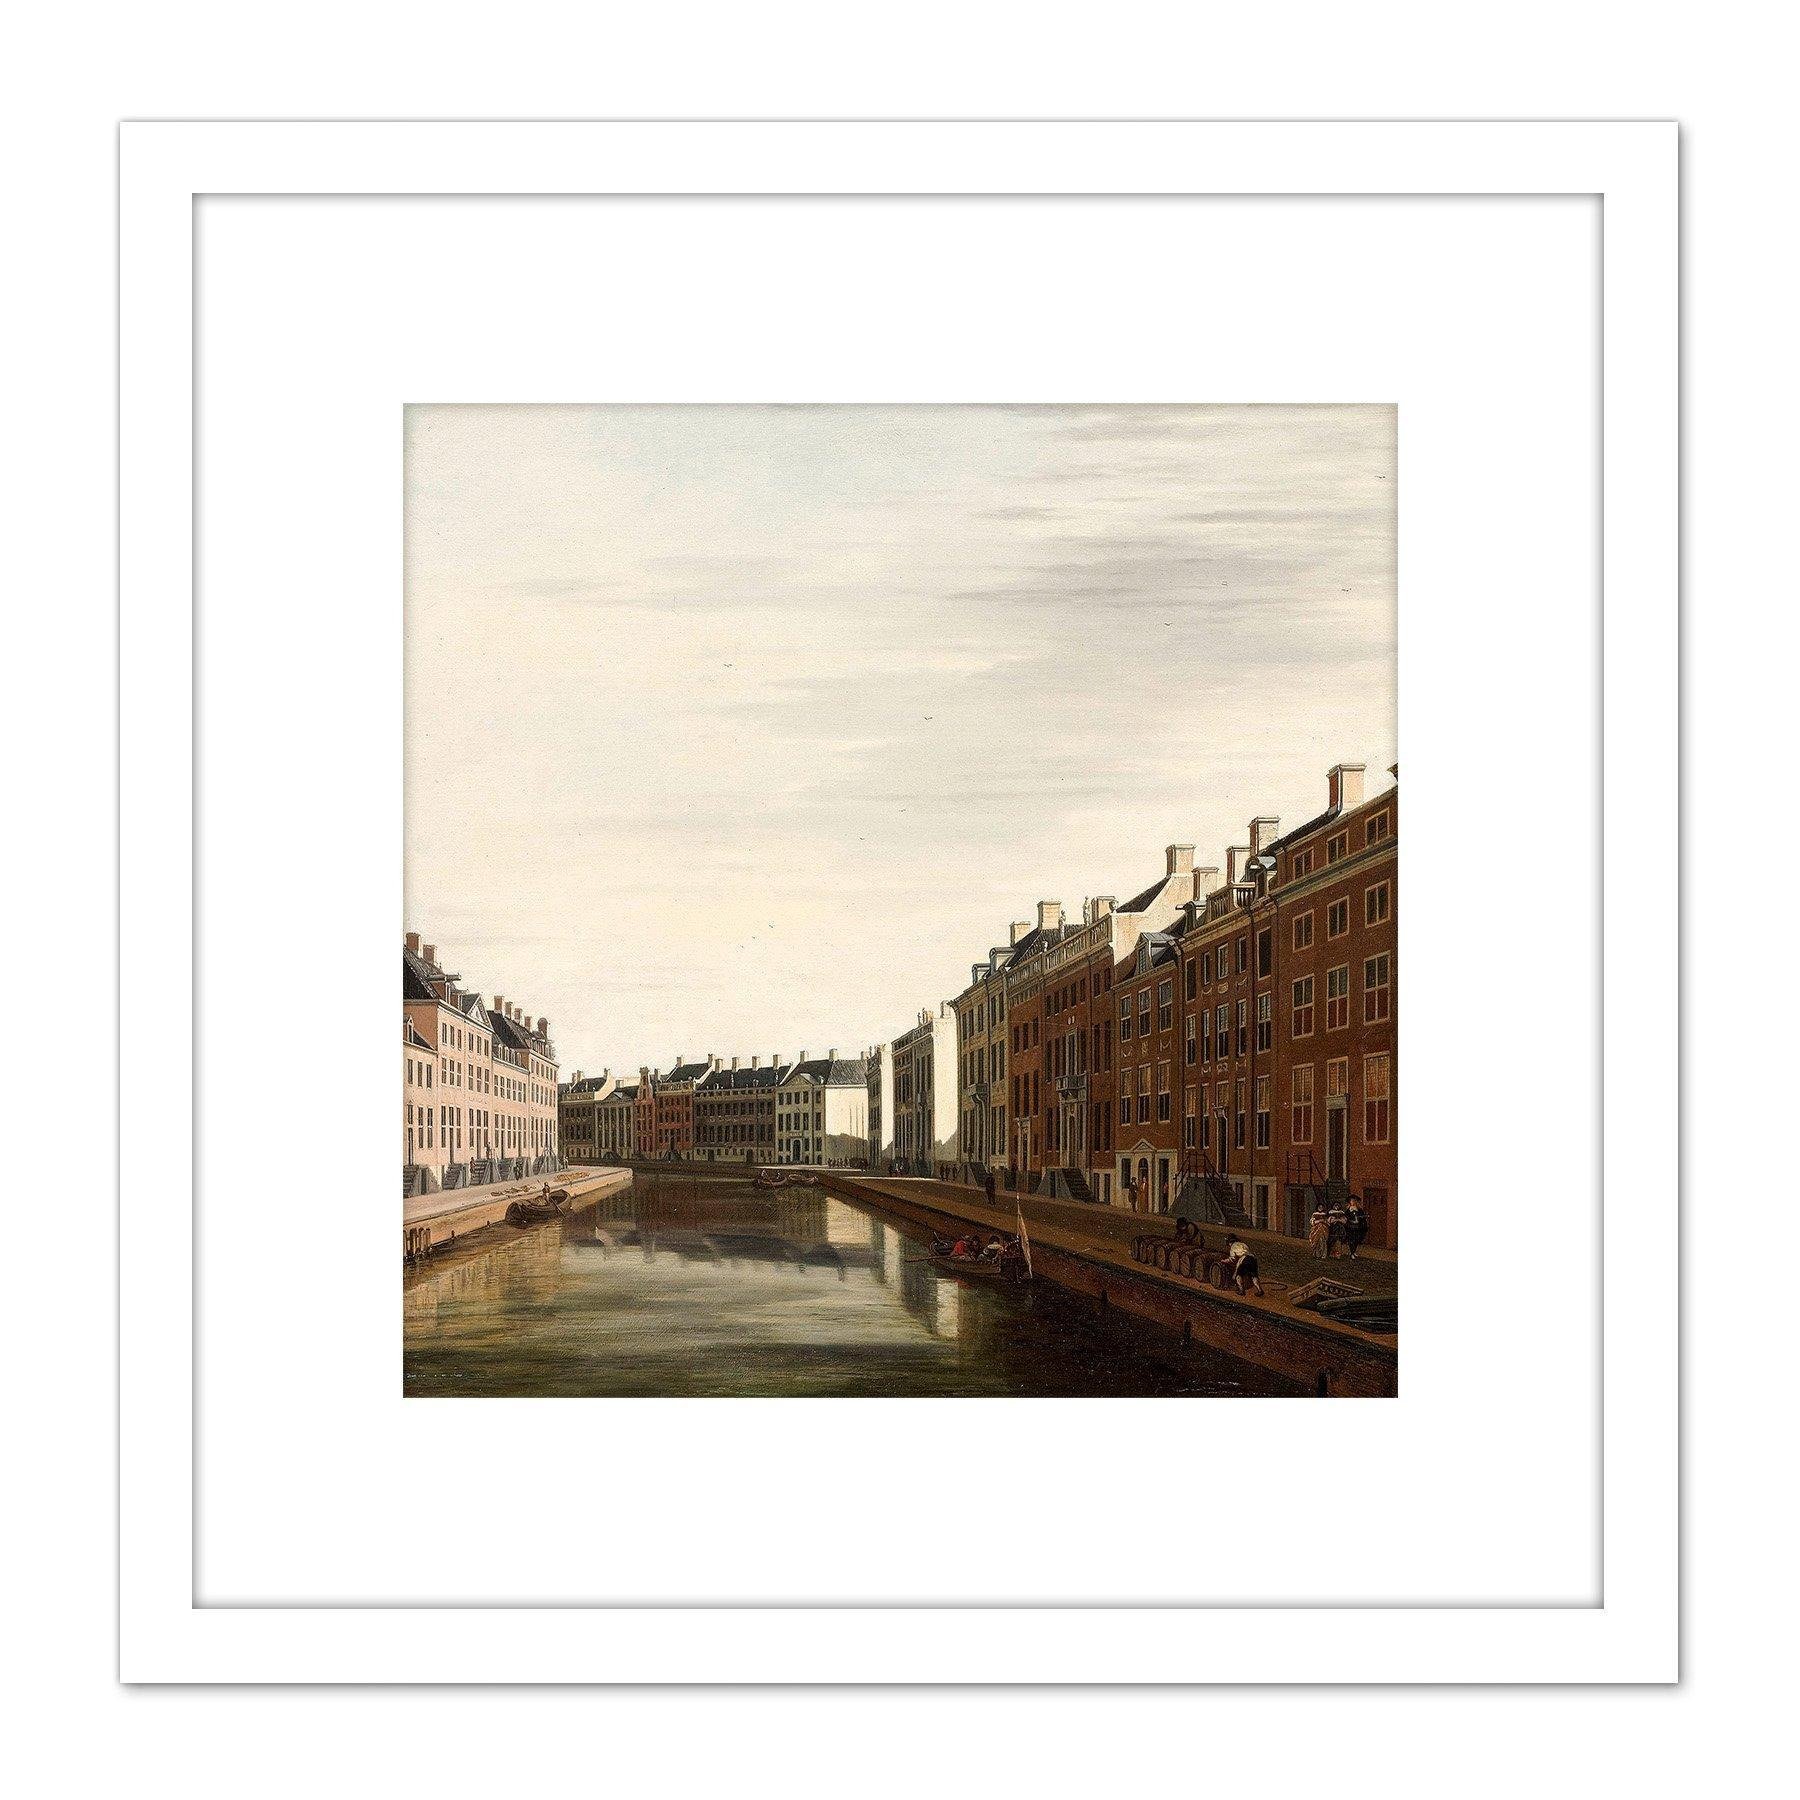 Berckheyde The Golden Bend Amsterdam 8X8 Inch Square Wooden Framed Wall Art Print Picture with Mount - image 1